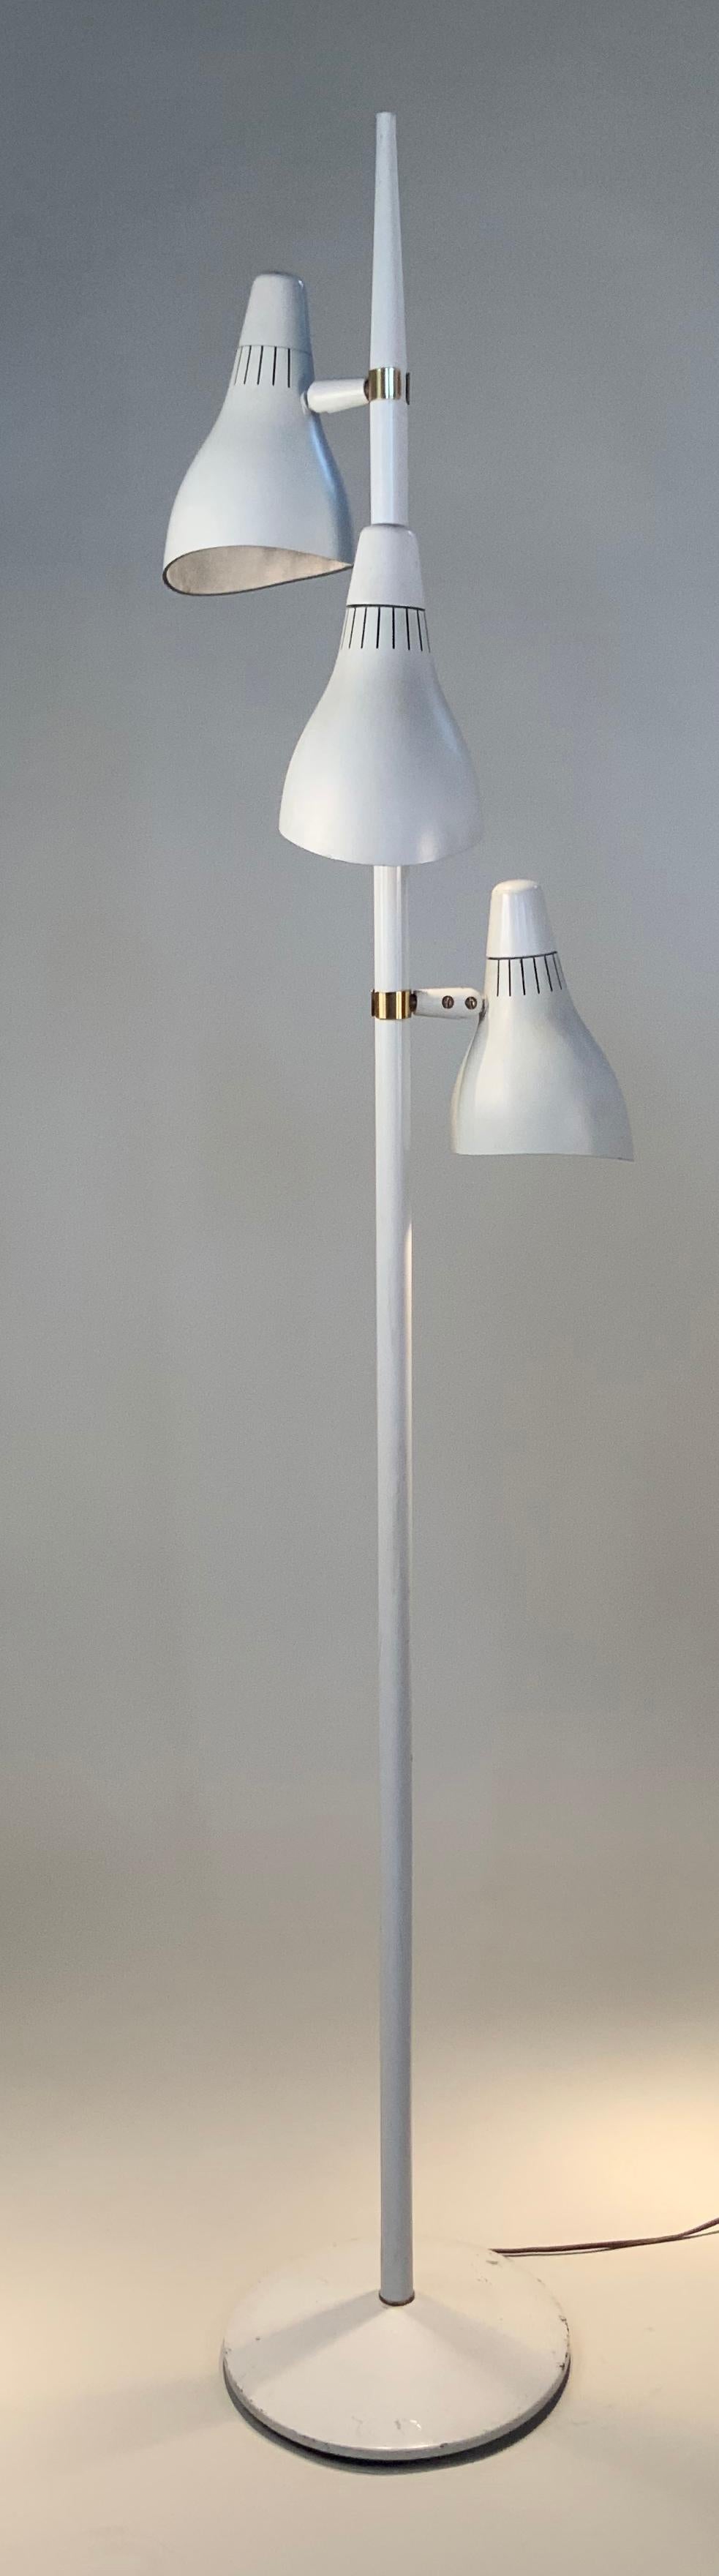 A very well designed vintage 1950s floor lamp with three lights, fully adjustable, mounted with brass fittings on a tall stem. Beautifully shaped conical shades with integrated switches at the top of each vented shade. Marked with Lightolier's